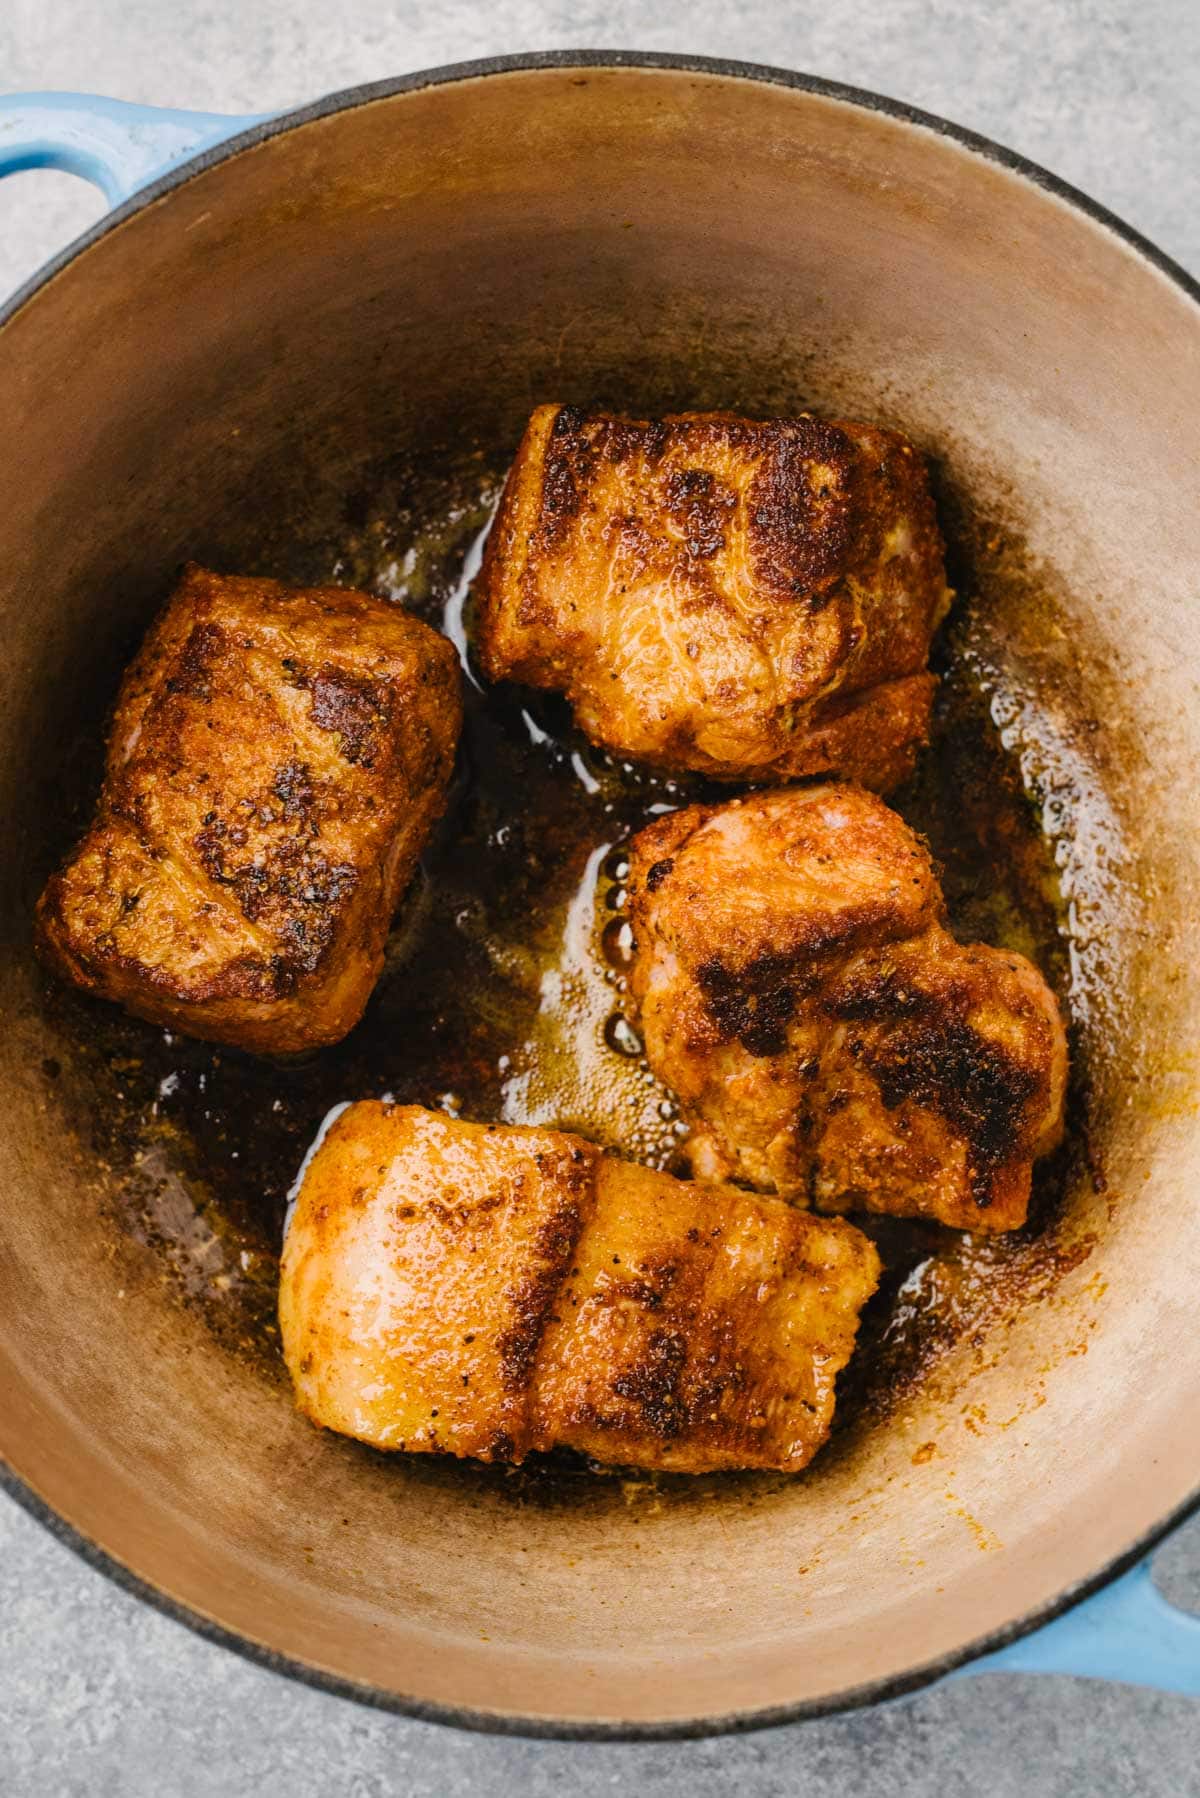 Seared pieces of boneless pork butt coated in dry rub being seared in a dutch oven.